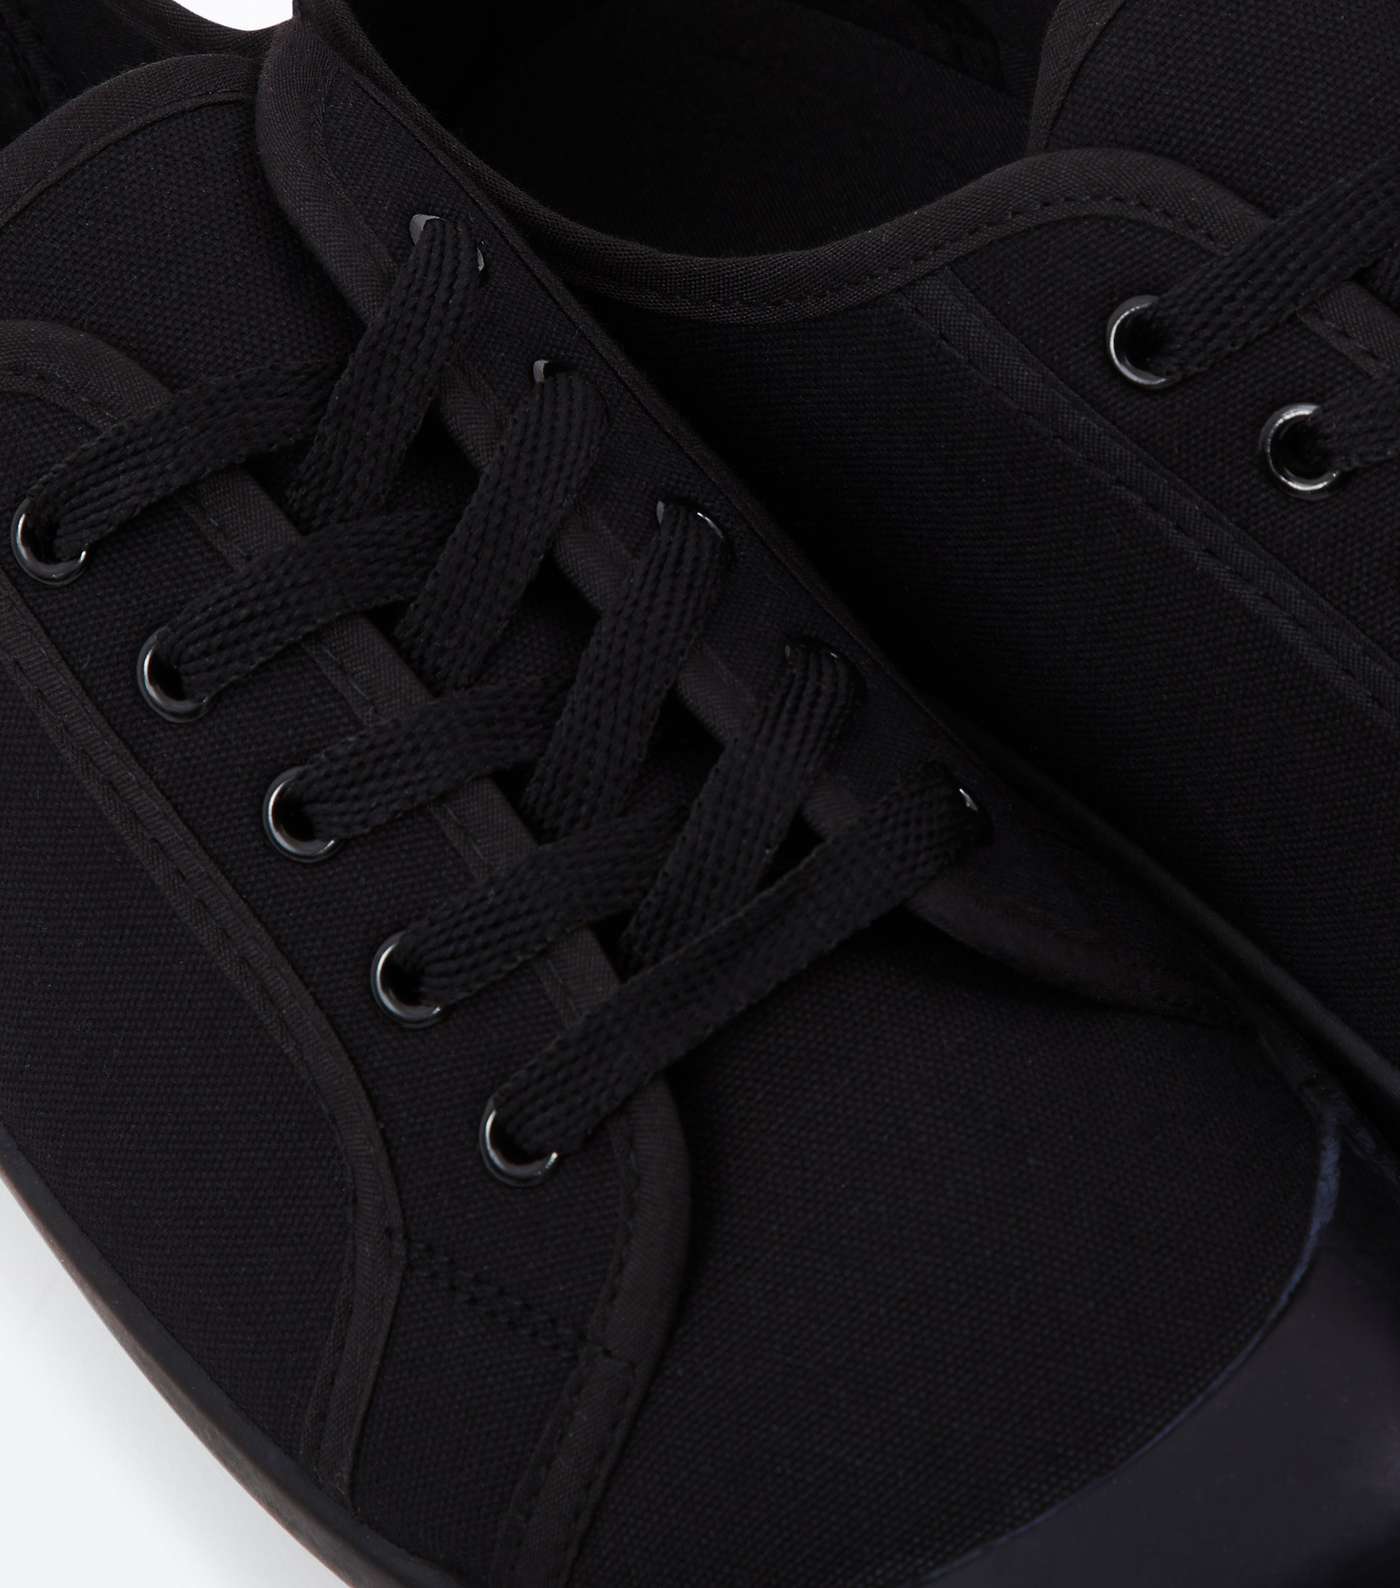 Black Canvas Lace Up Trainers Image 3